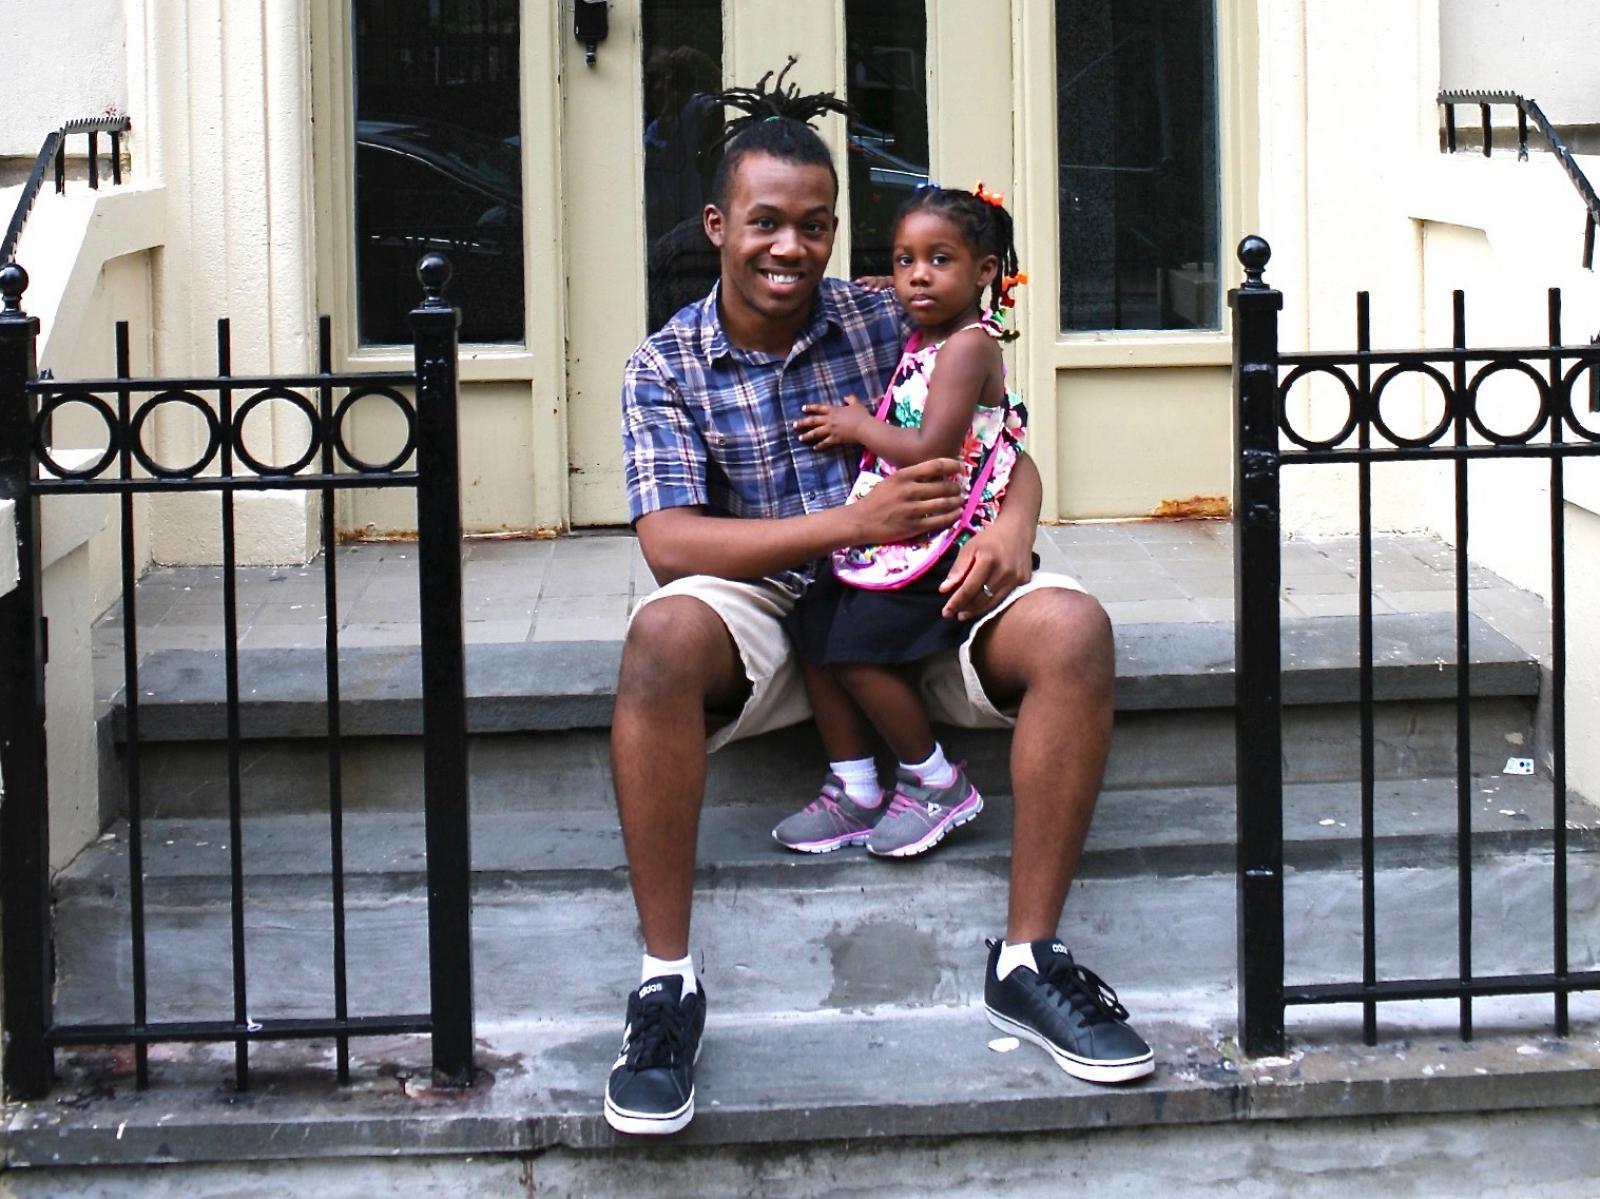 Jordan, a young Black man, sitting outside his house with small girl on his knee. 